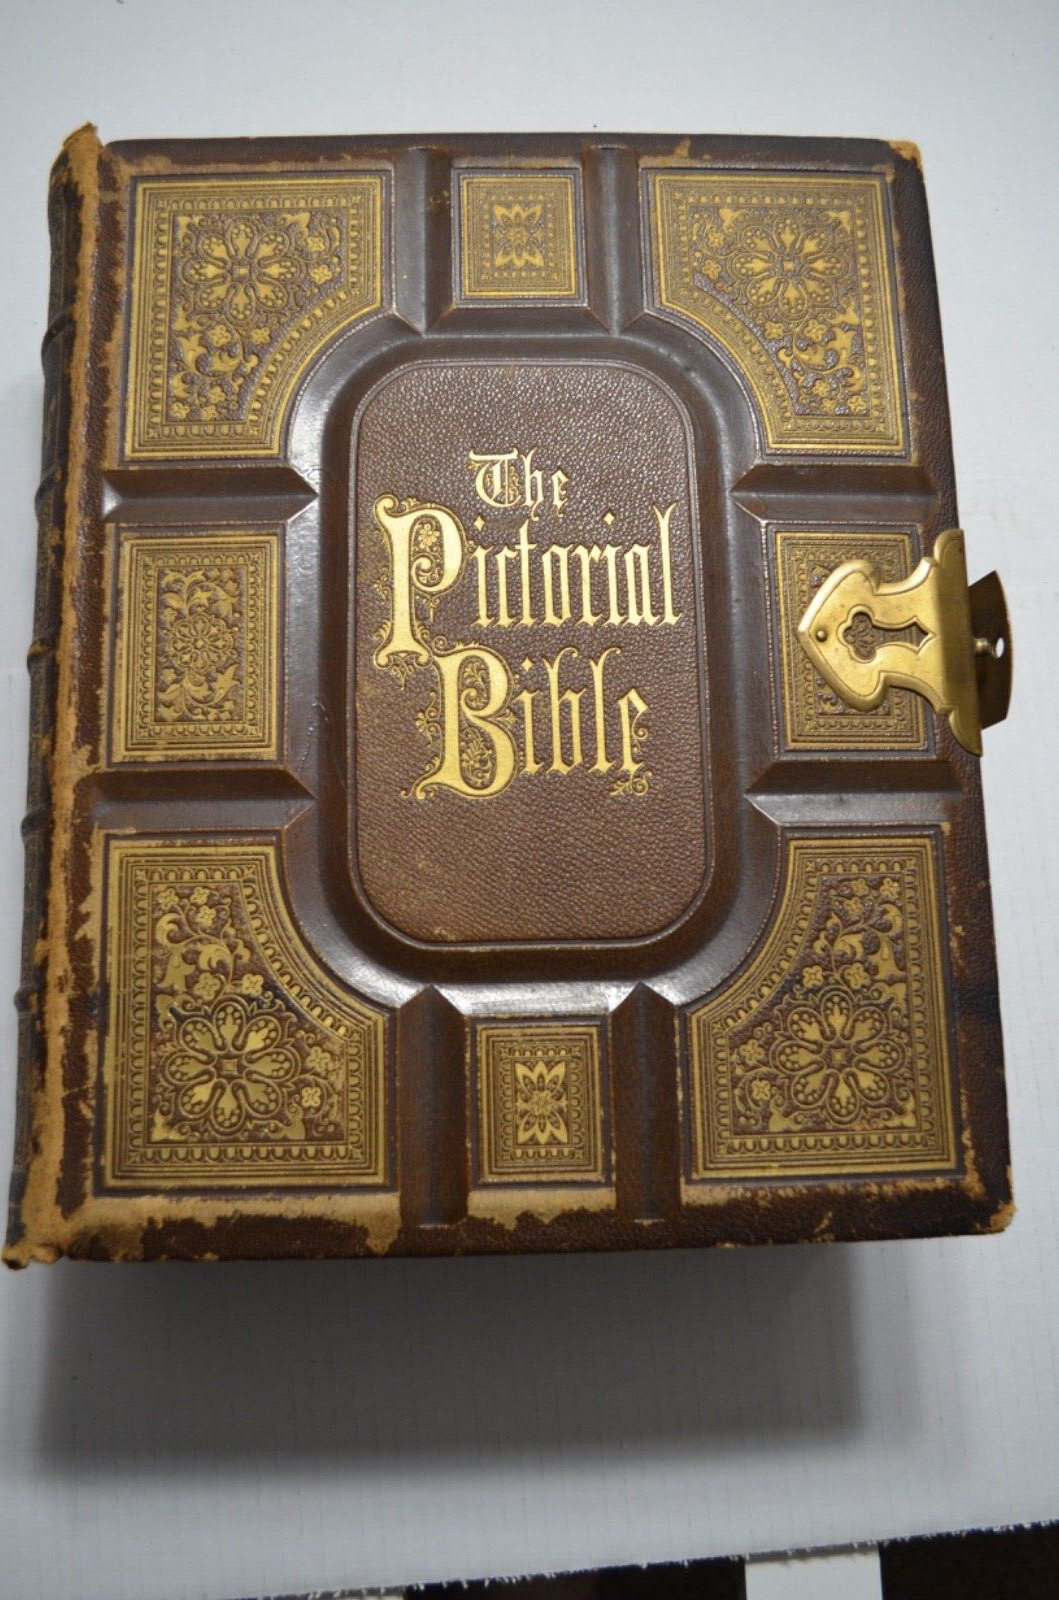 The Pictorial Bible 1873